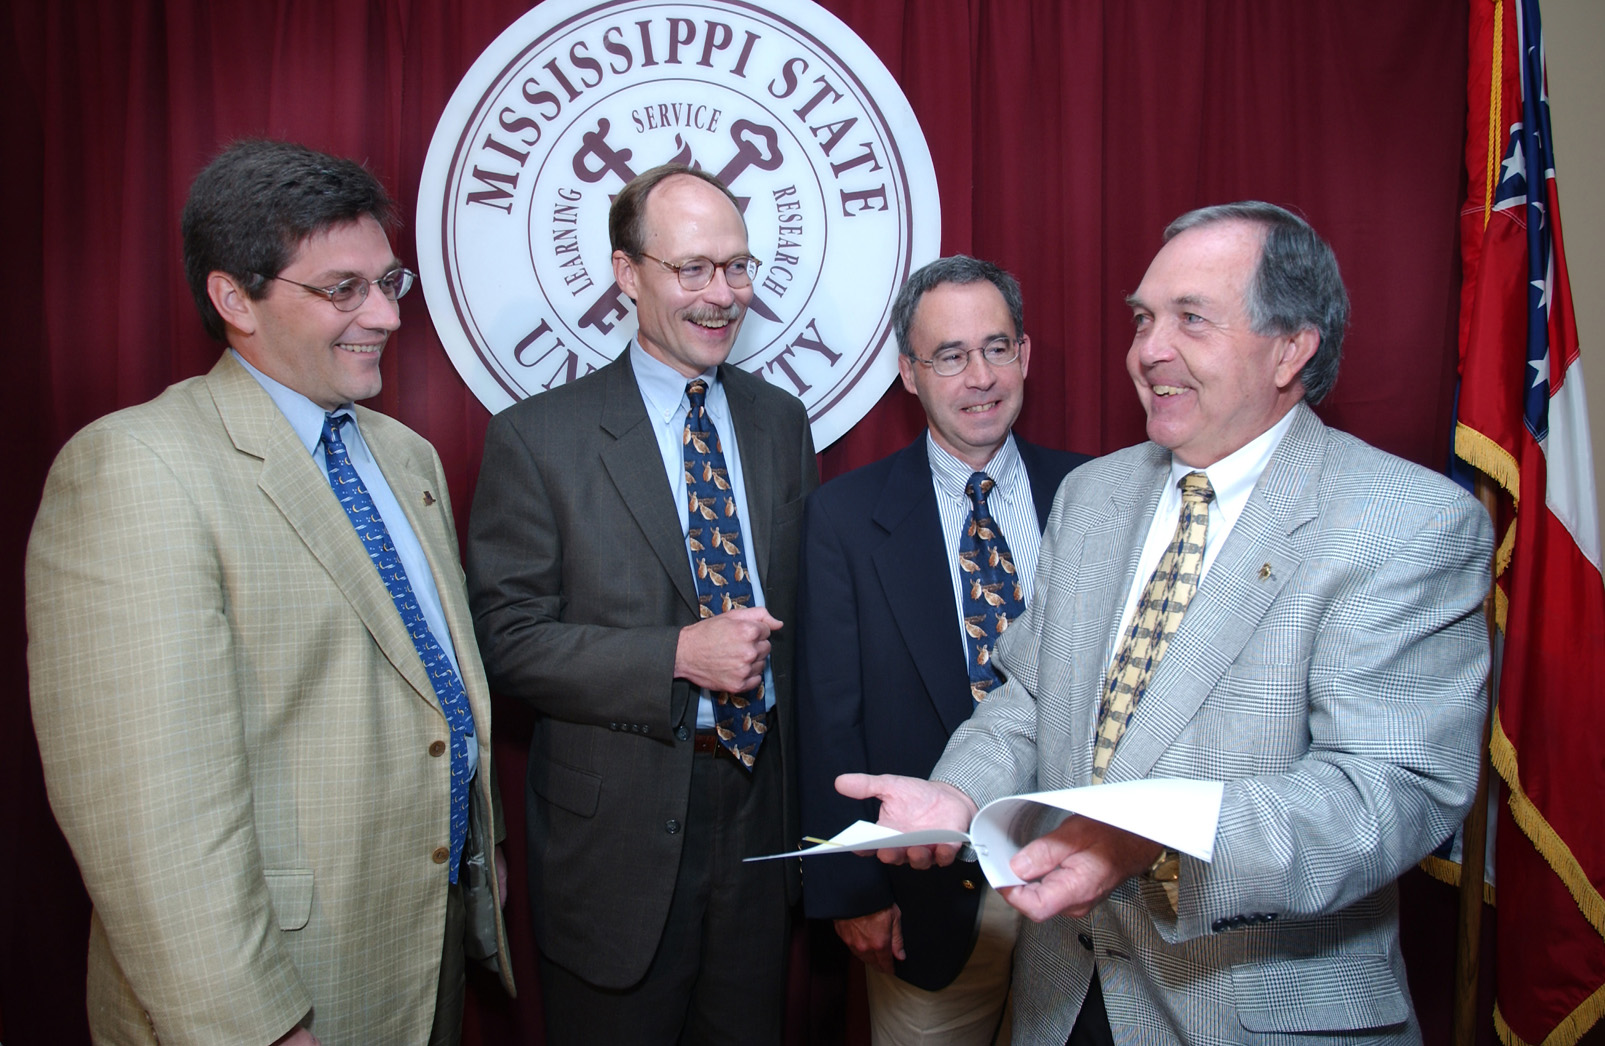 <br />
Commemorating the partnership were (l-r) Bruce Knight of the Natural Resources Conservation Center, Corky Pugh of the Southeastern Association of Fish and Wildlife Agencies, Dave Howell of Quail Unlimited, and Vance Watson, MSU interim vice president of agriculture, forestry and veterinary medicine.   